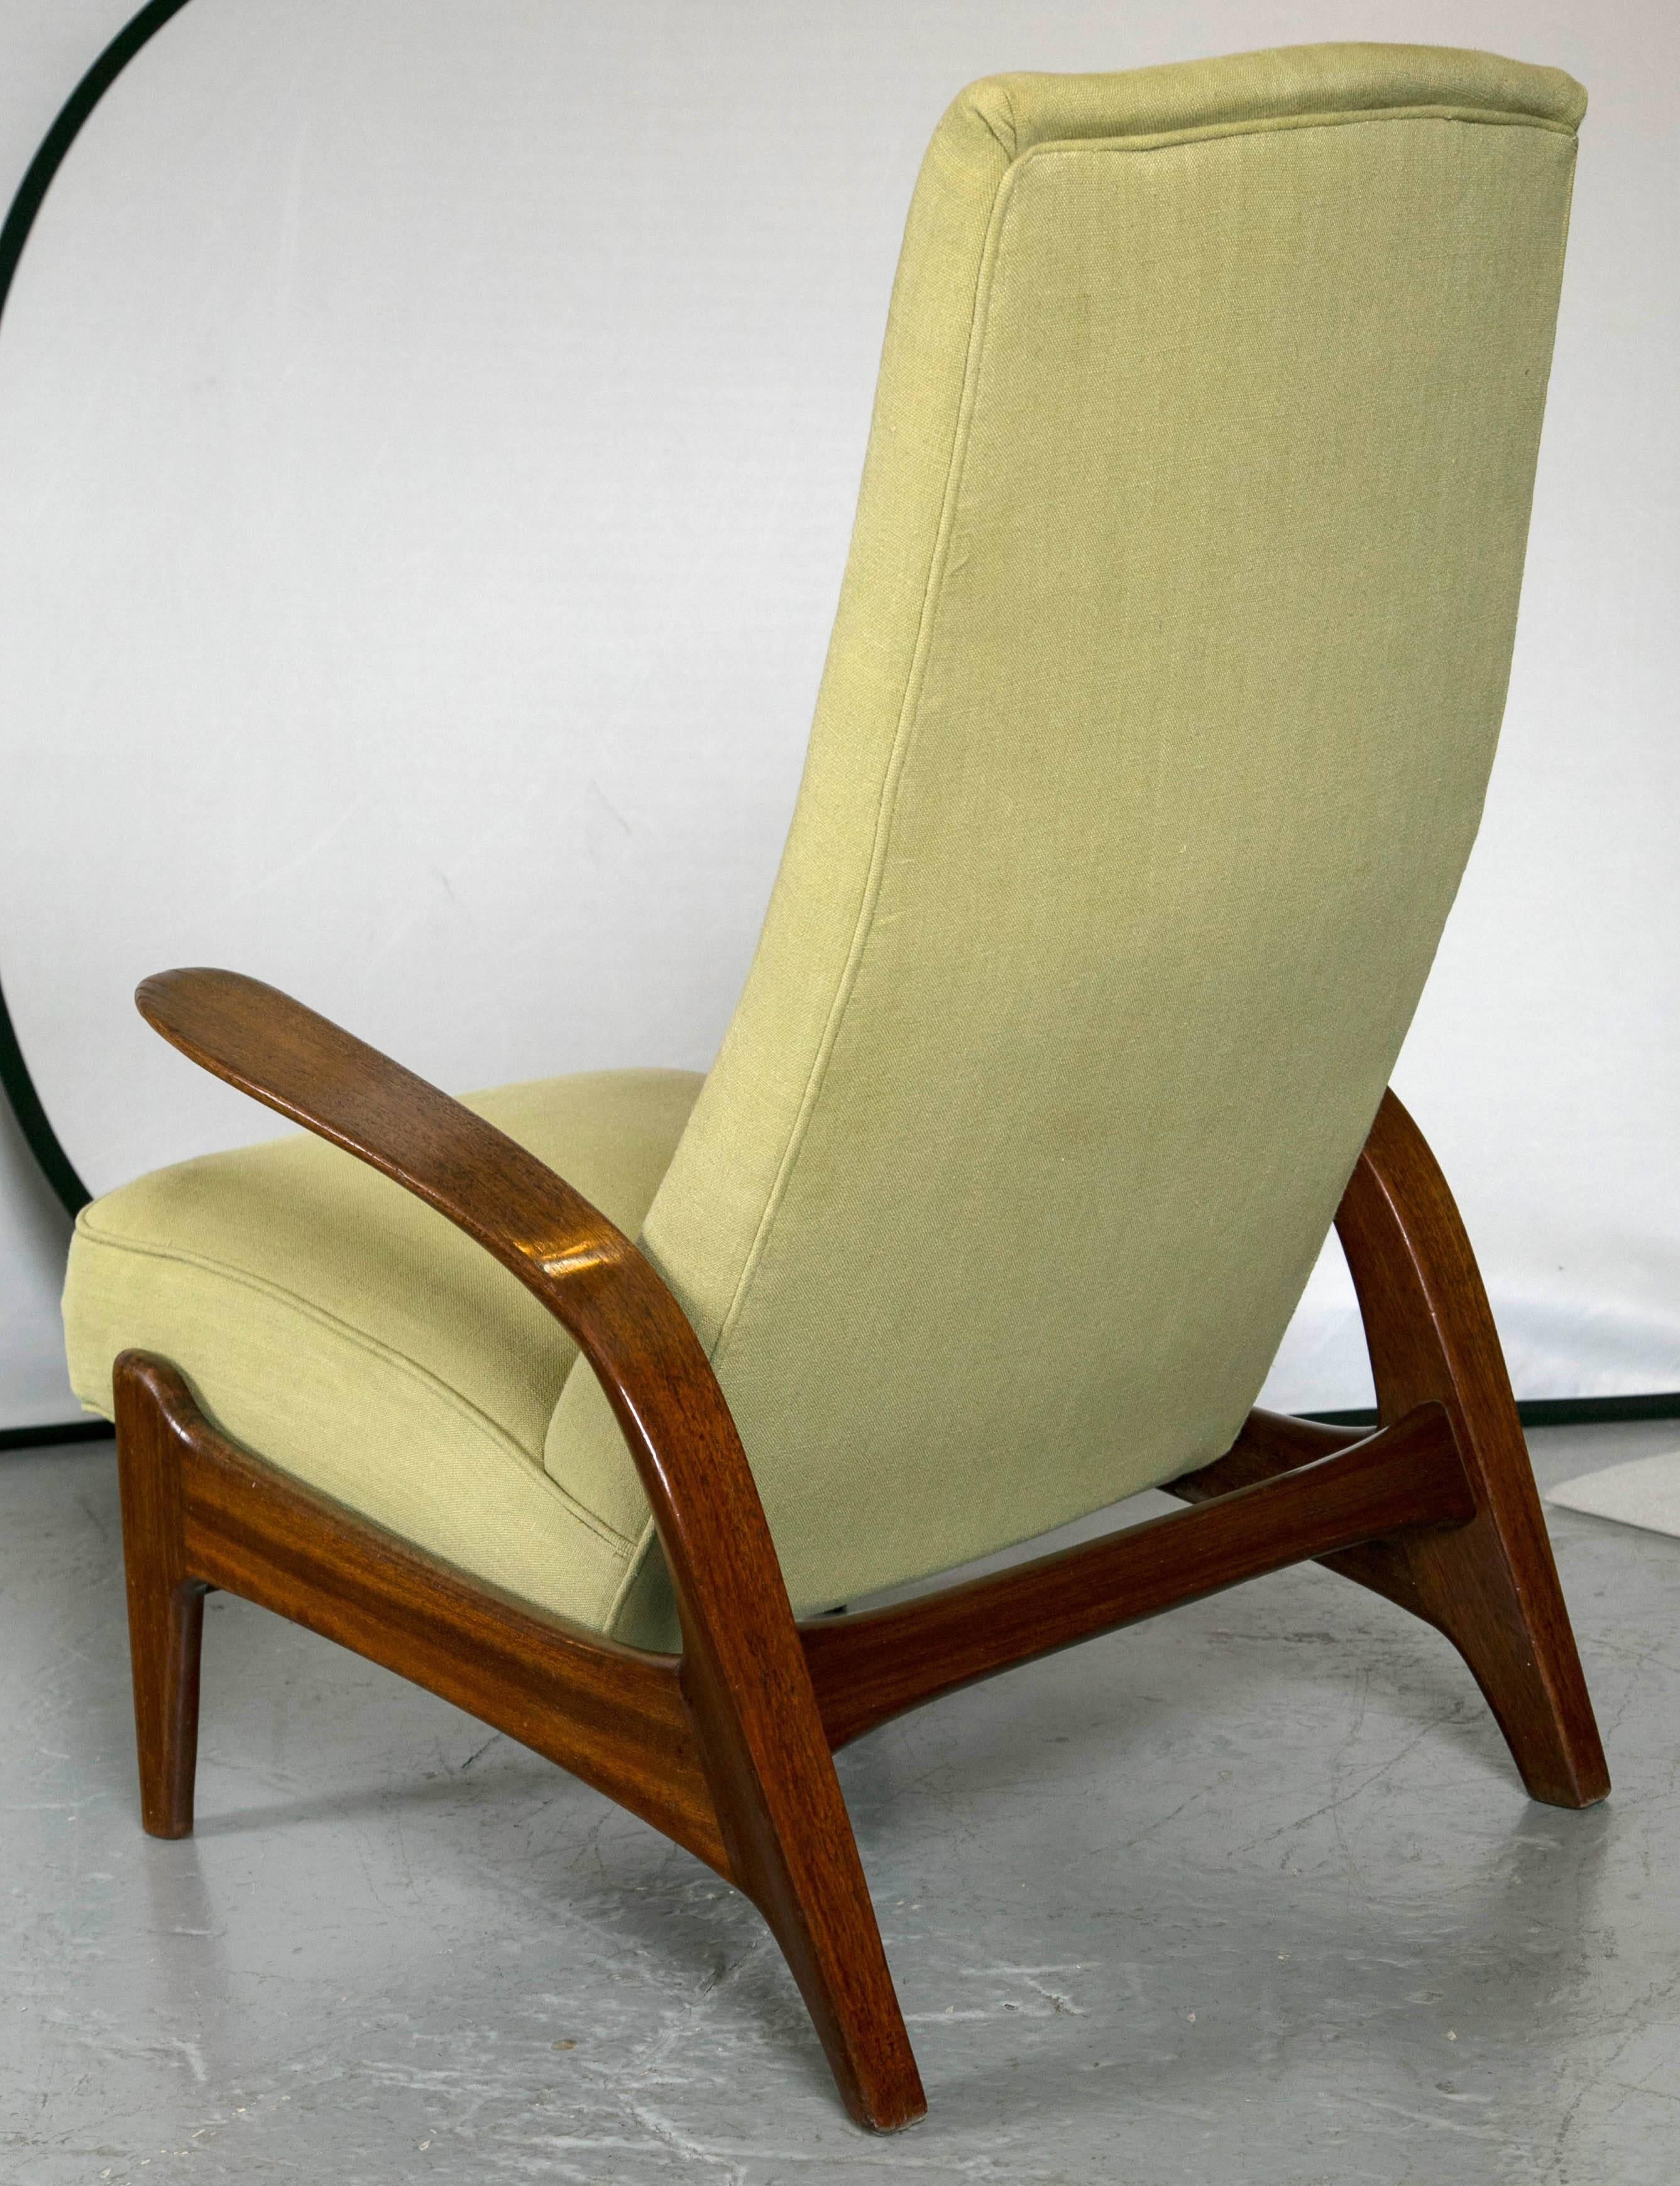 Mid-20th Century Pair of Gimson & Slater Rock n Rest Chairs